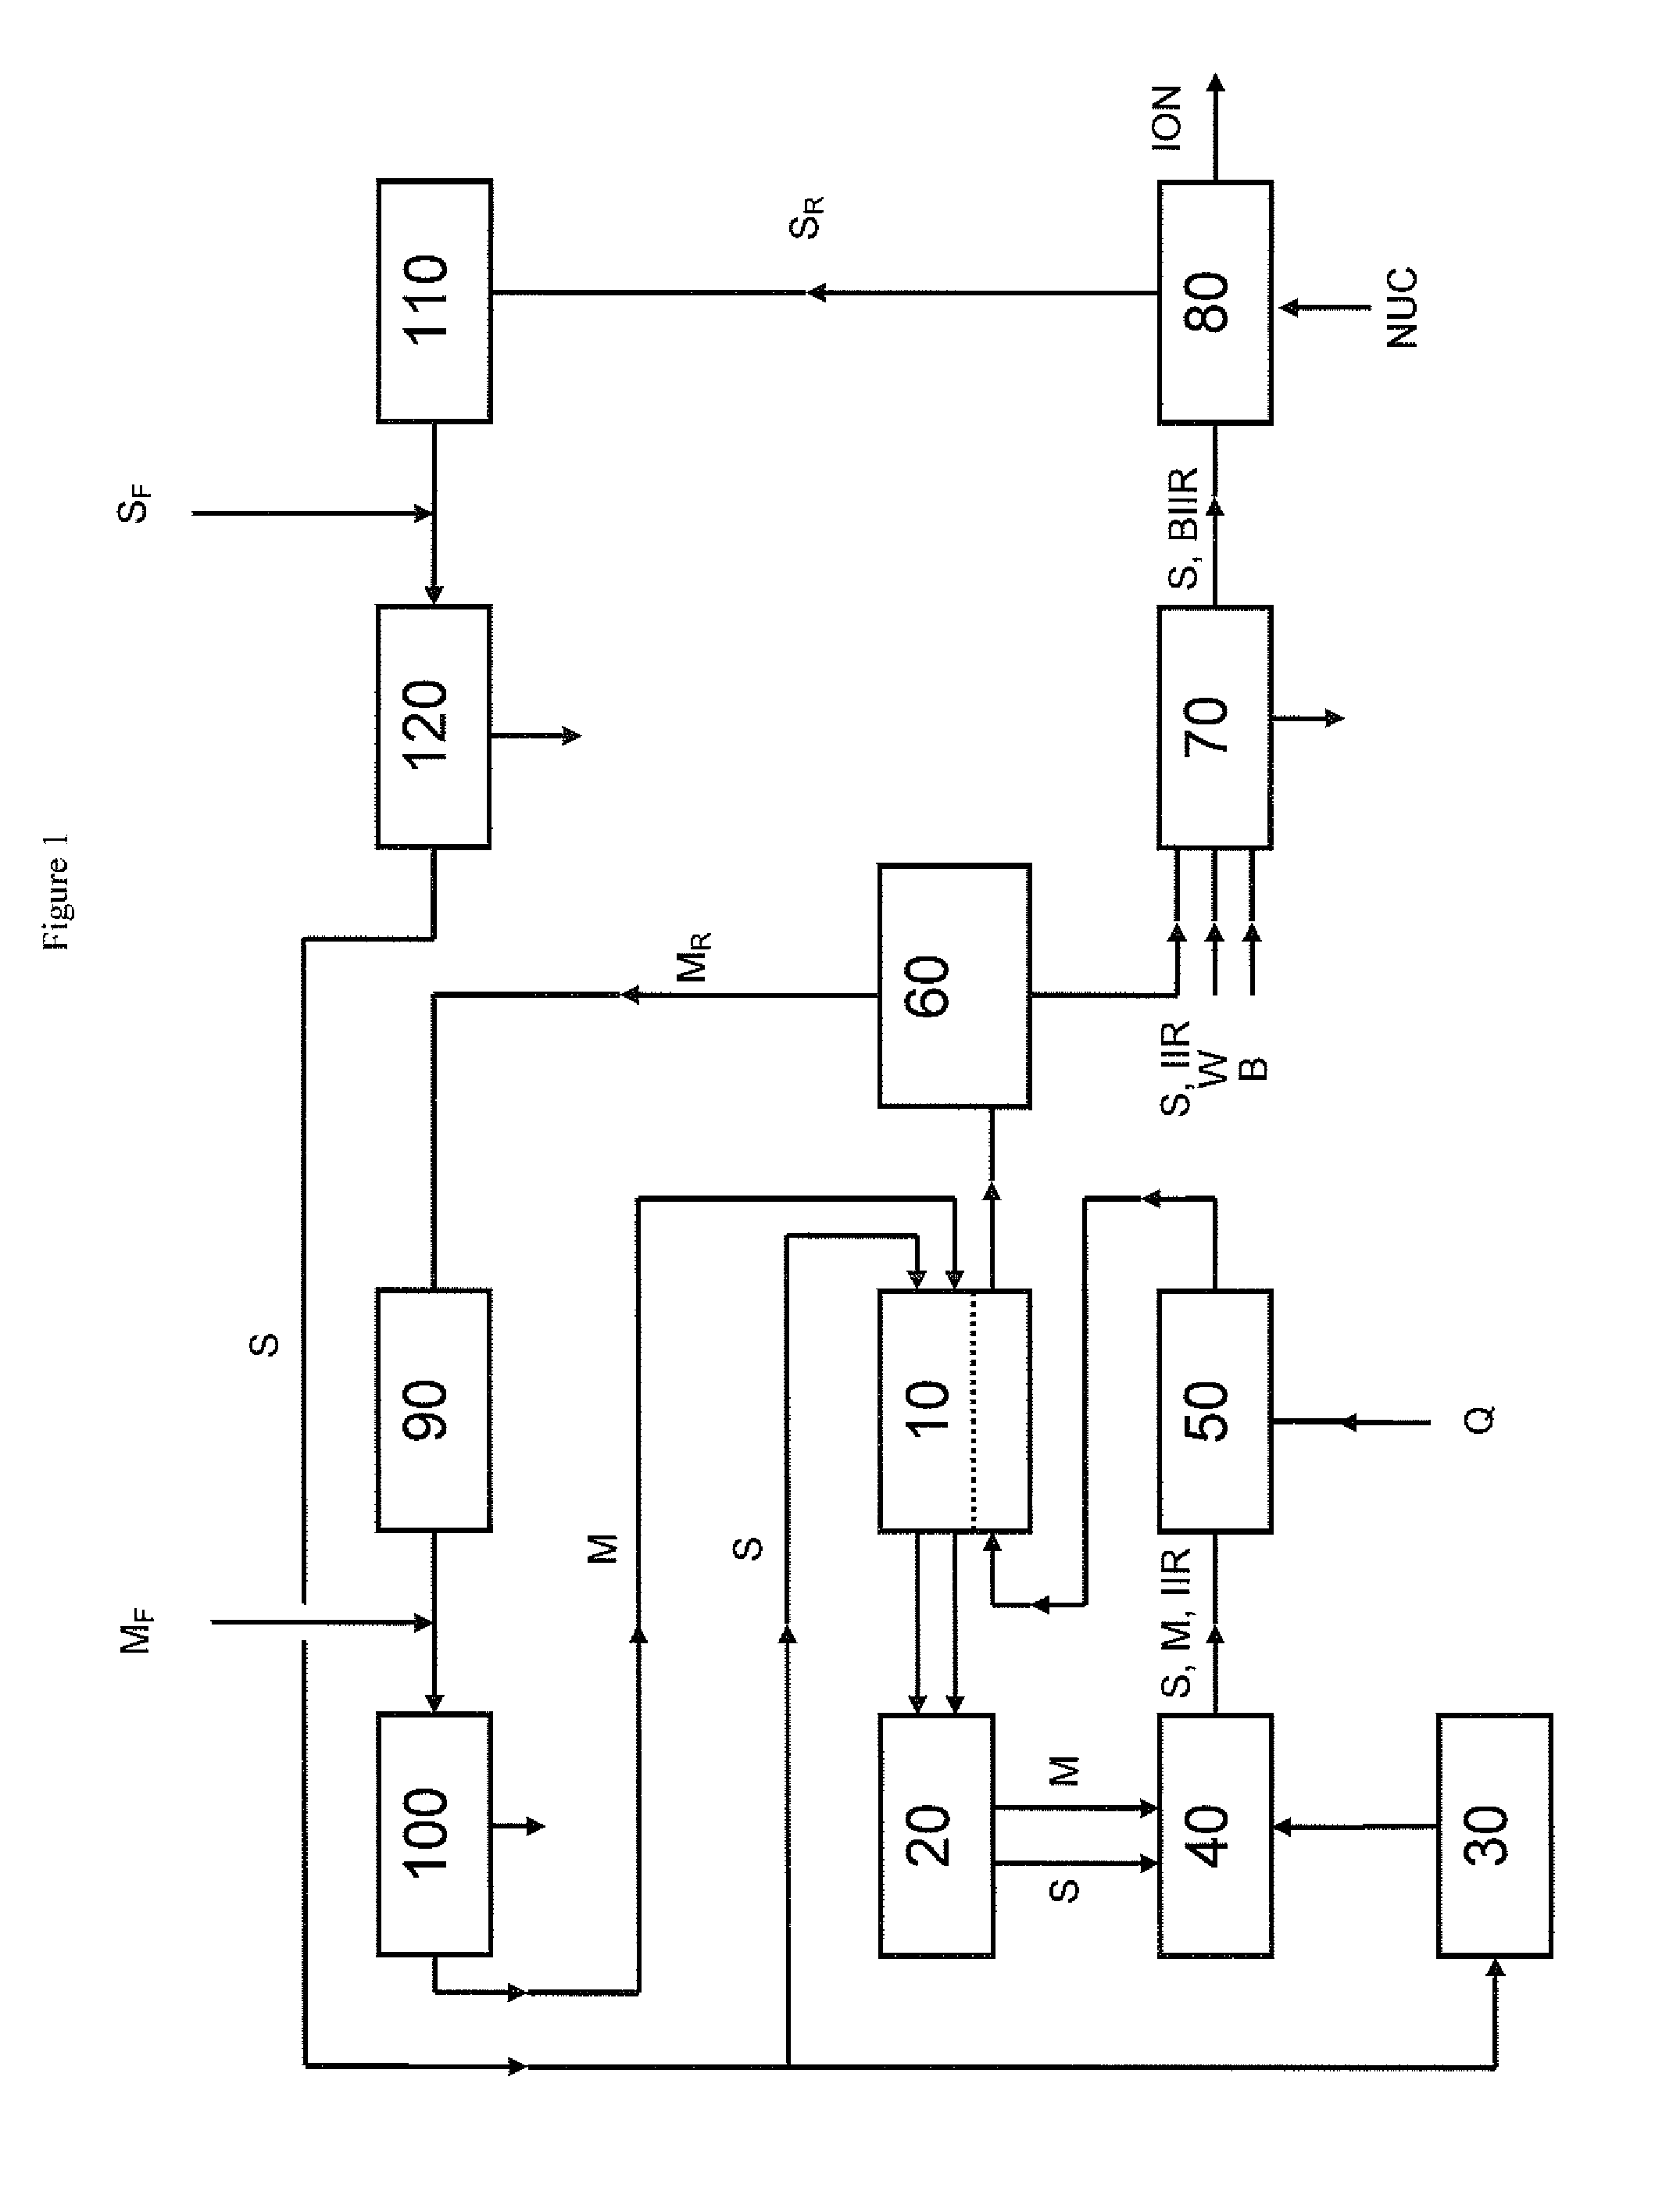 Process for production of halobutyl ionomers